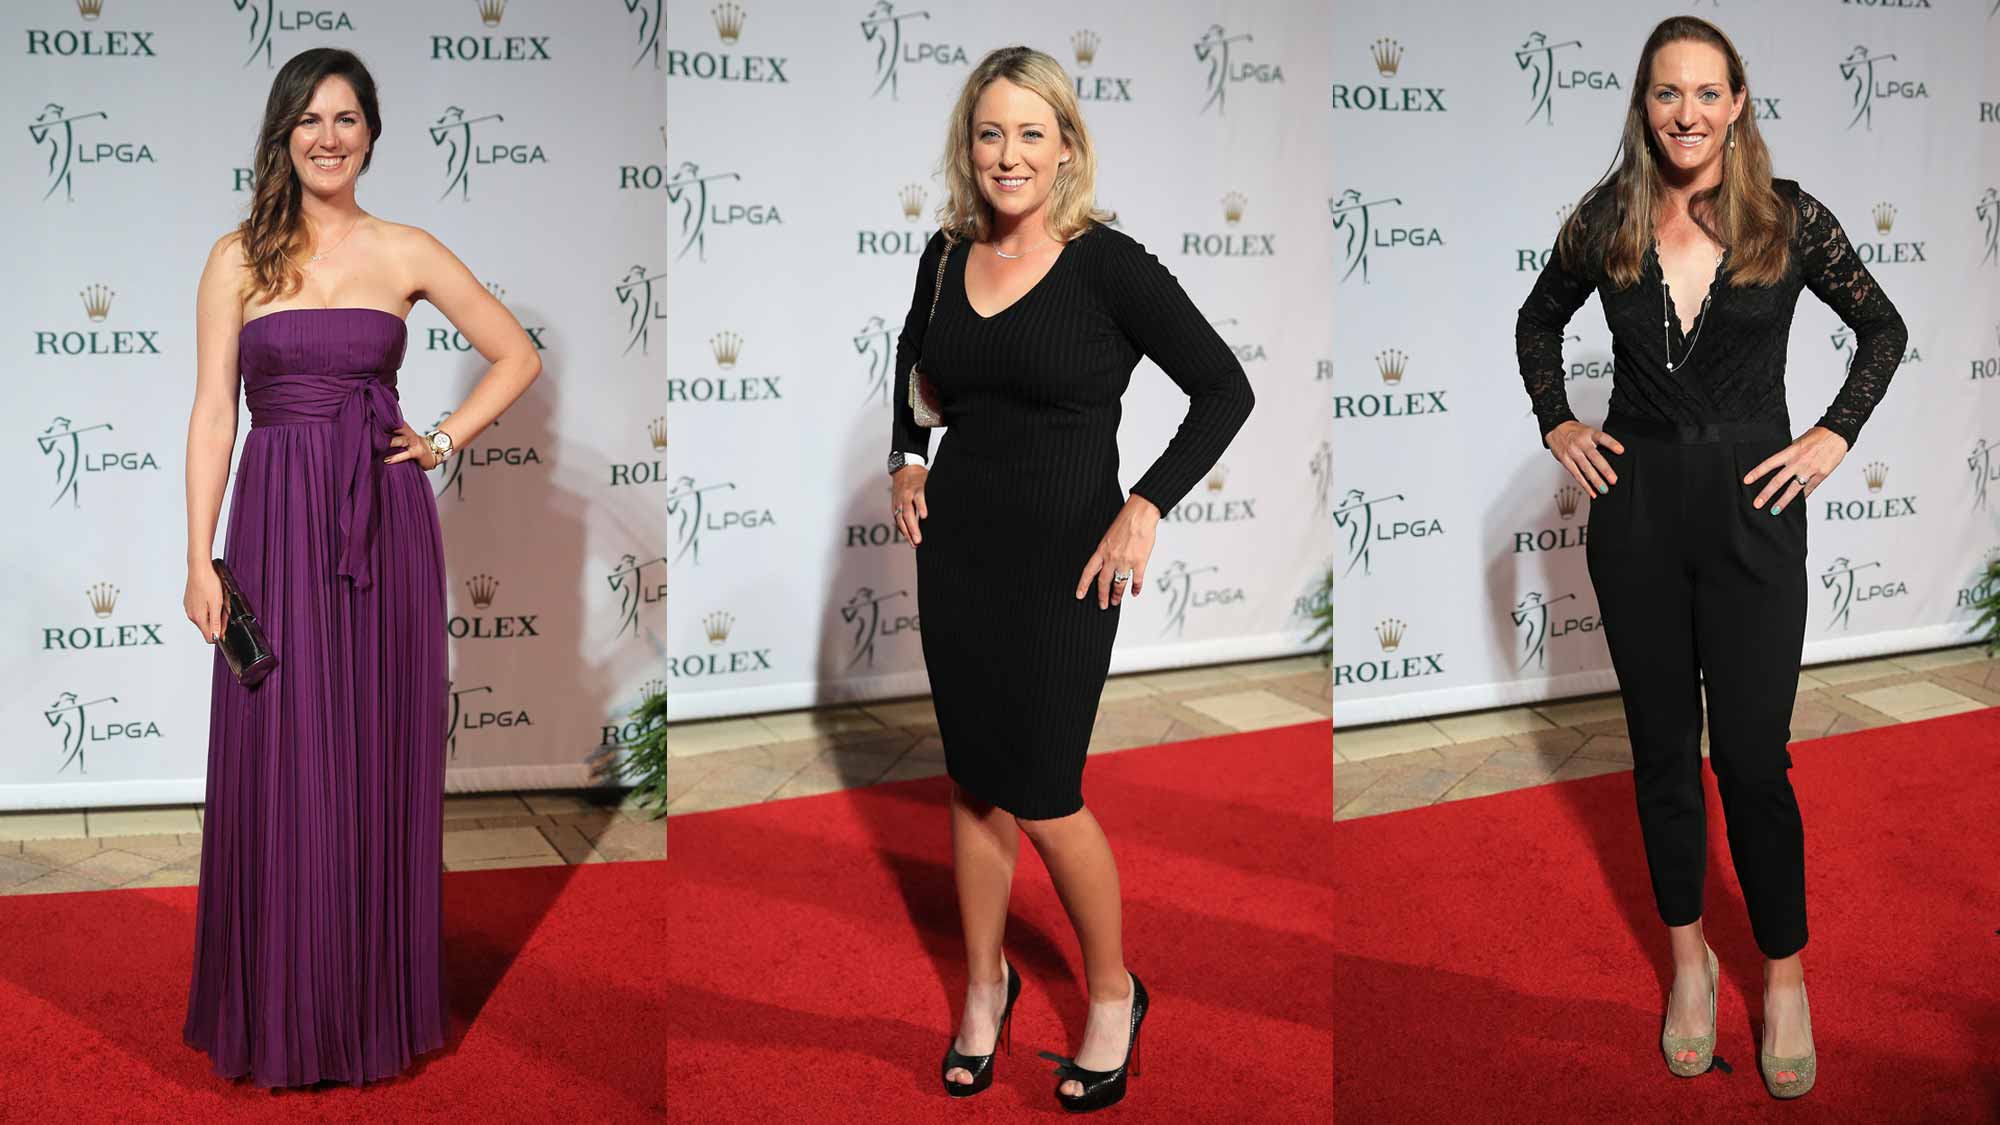 Left to Right: Sanra Gal, Cristie Kerr, and Brittany Lang pose on the red carpet before the LPGA Rolex Players Awards at the Ritz-Carlton, Naples